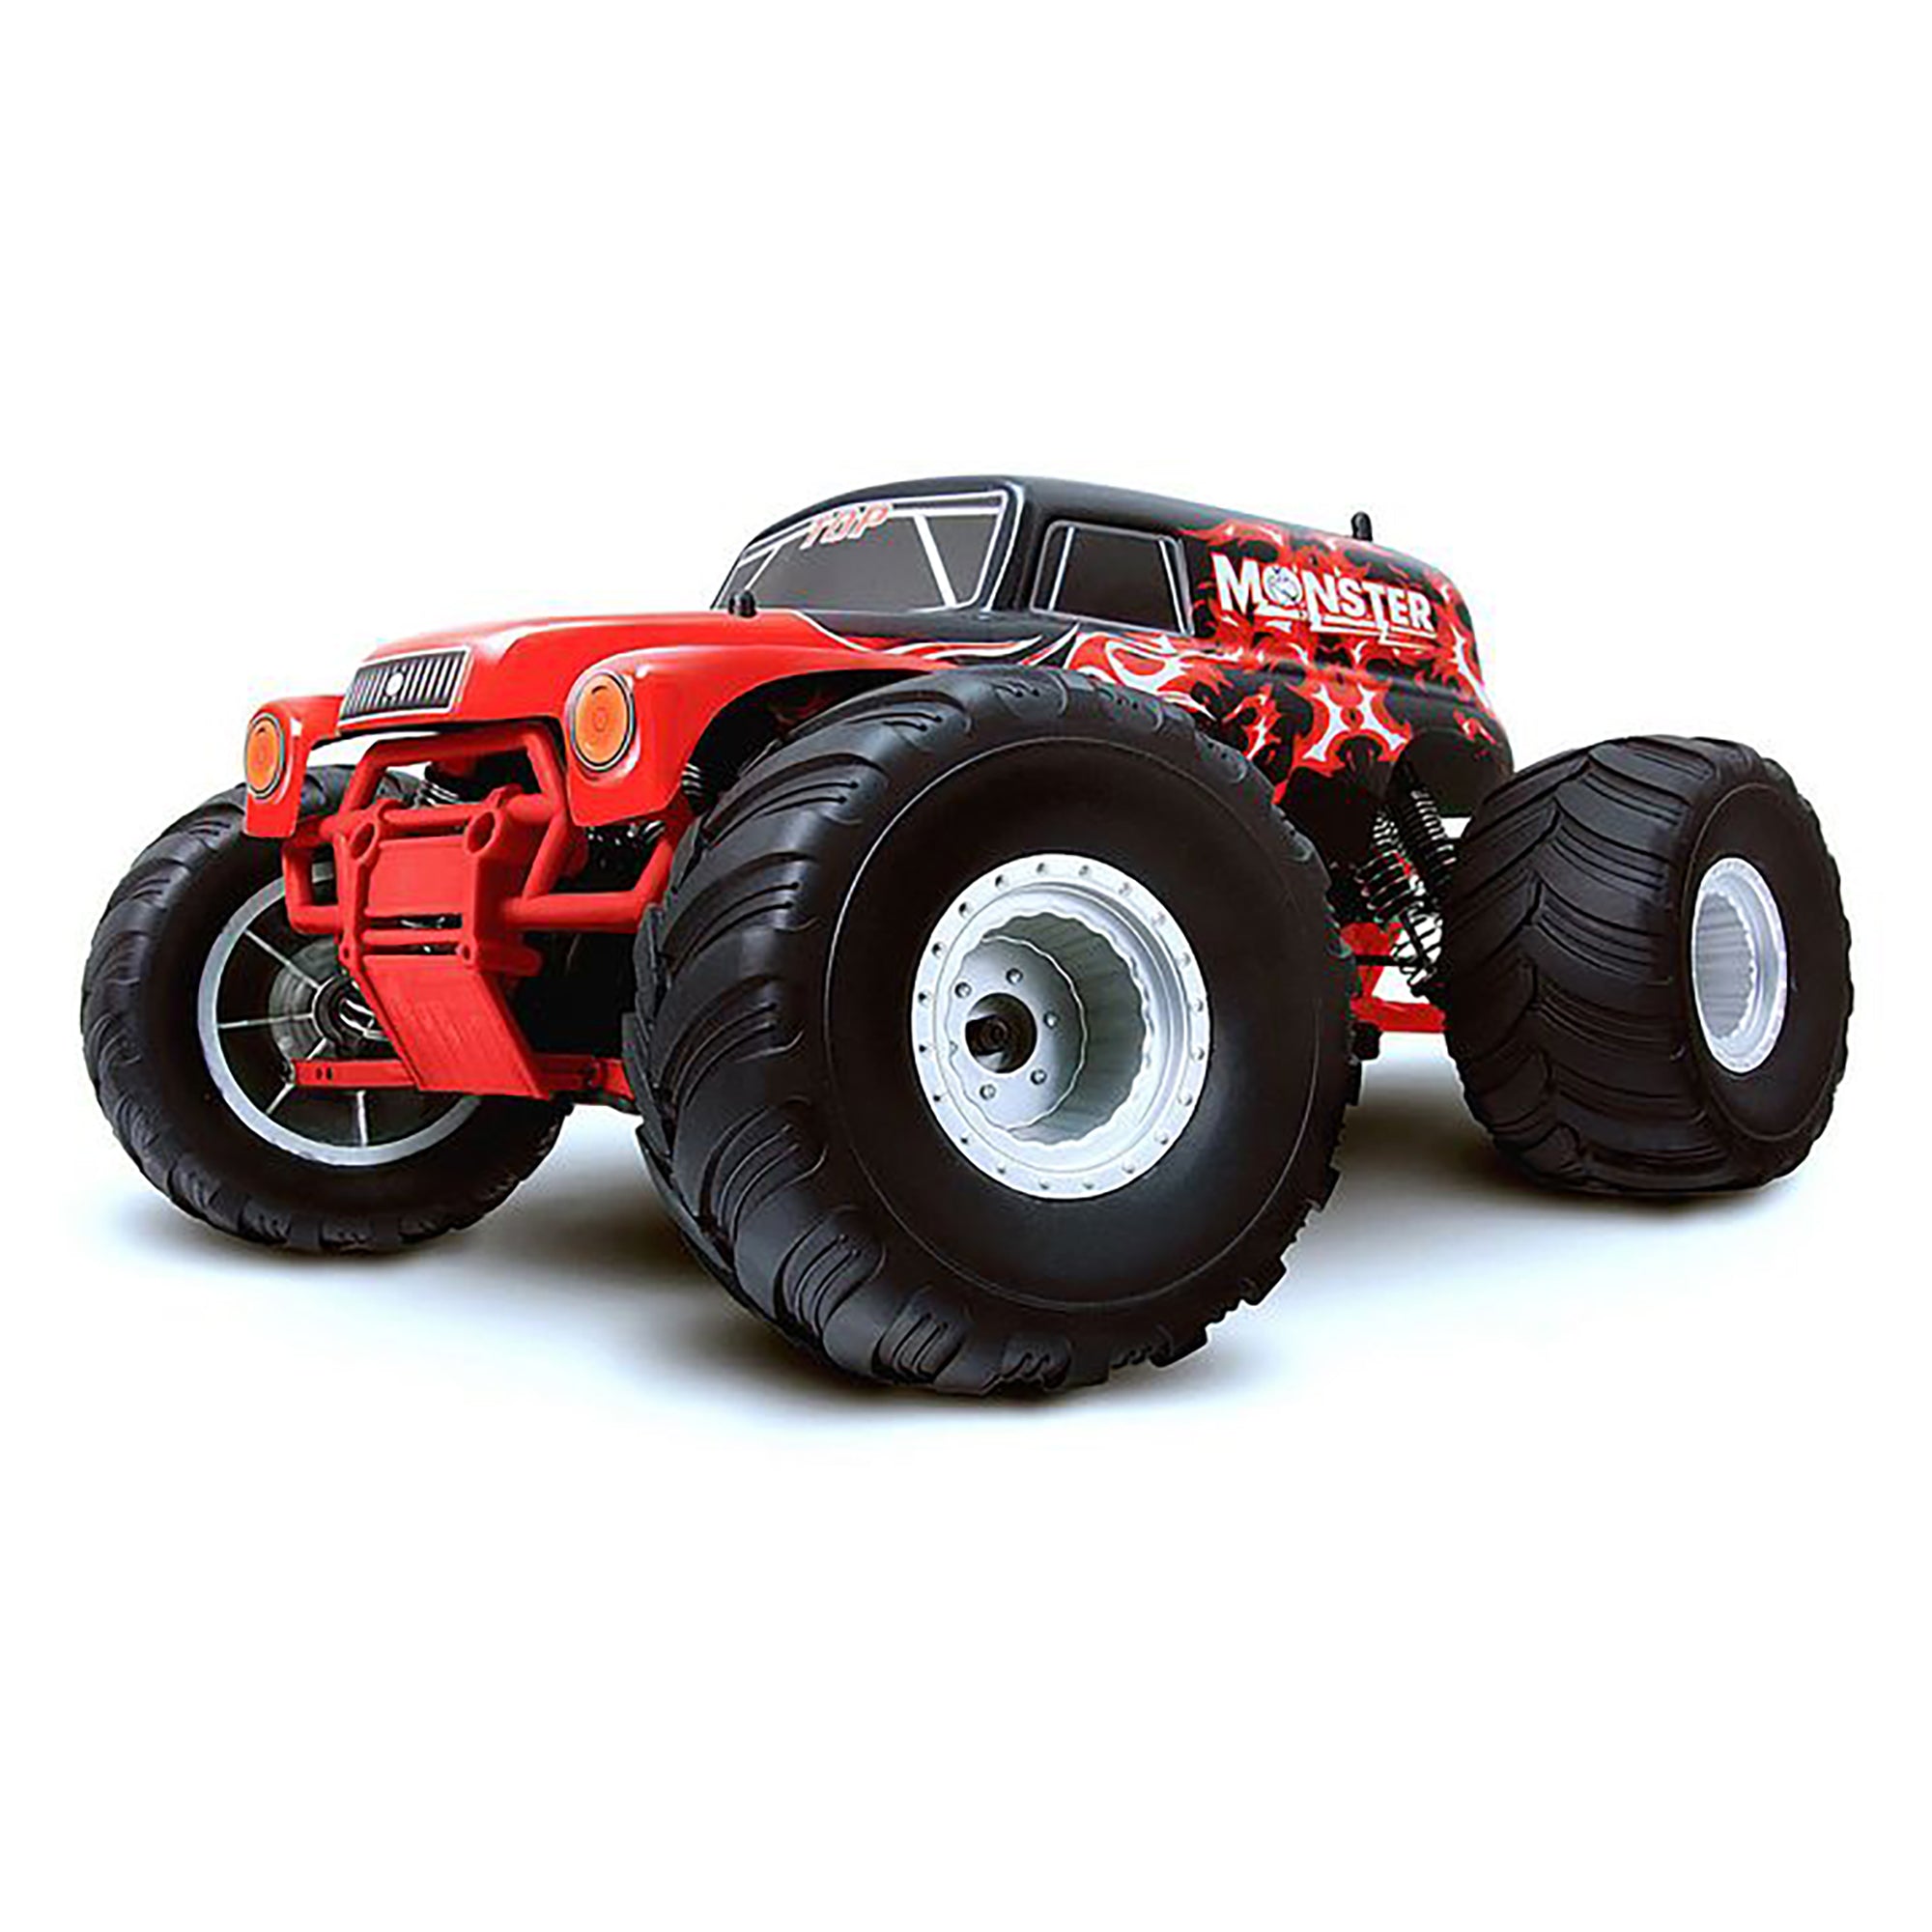 HSP Racing TOP Monster Truck Special Edition Red 2.4GHz 1/10 Brushless 4WD Off Road RTR RC Truck